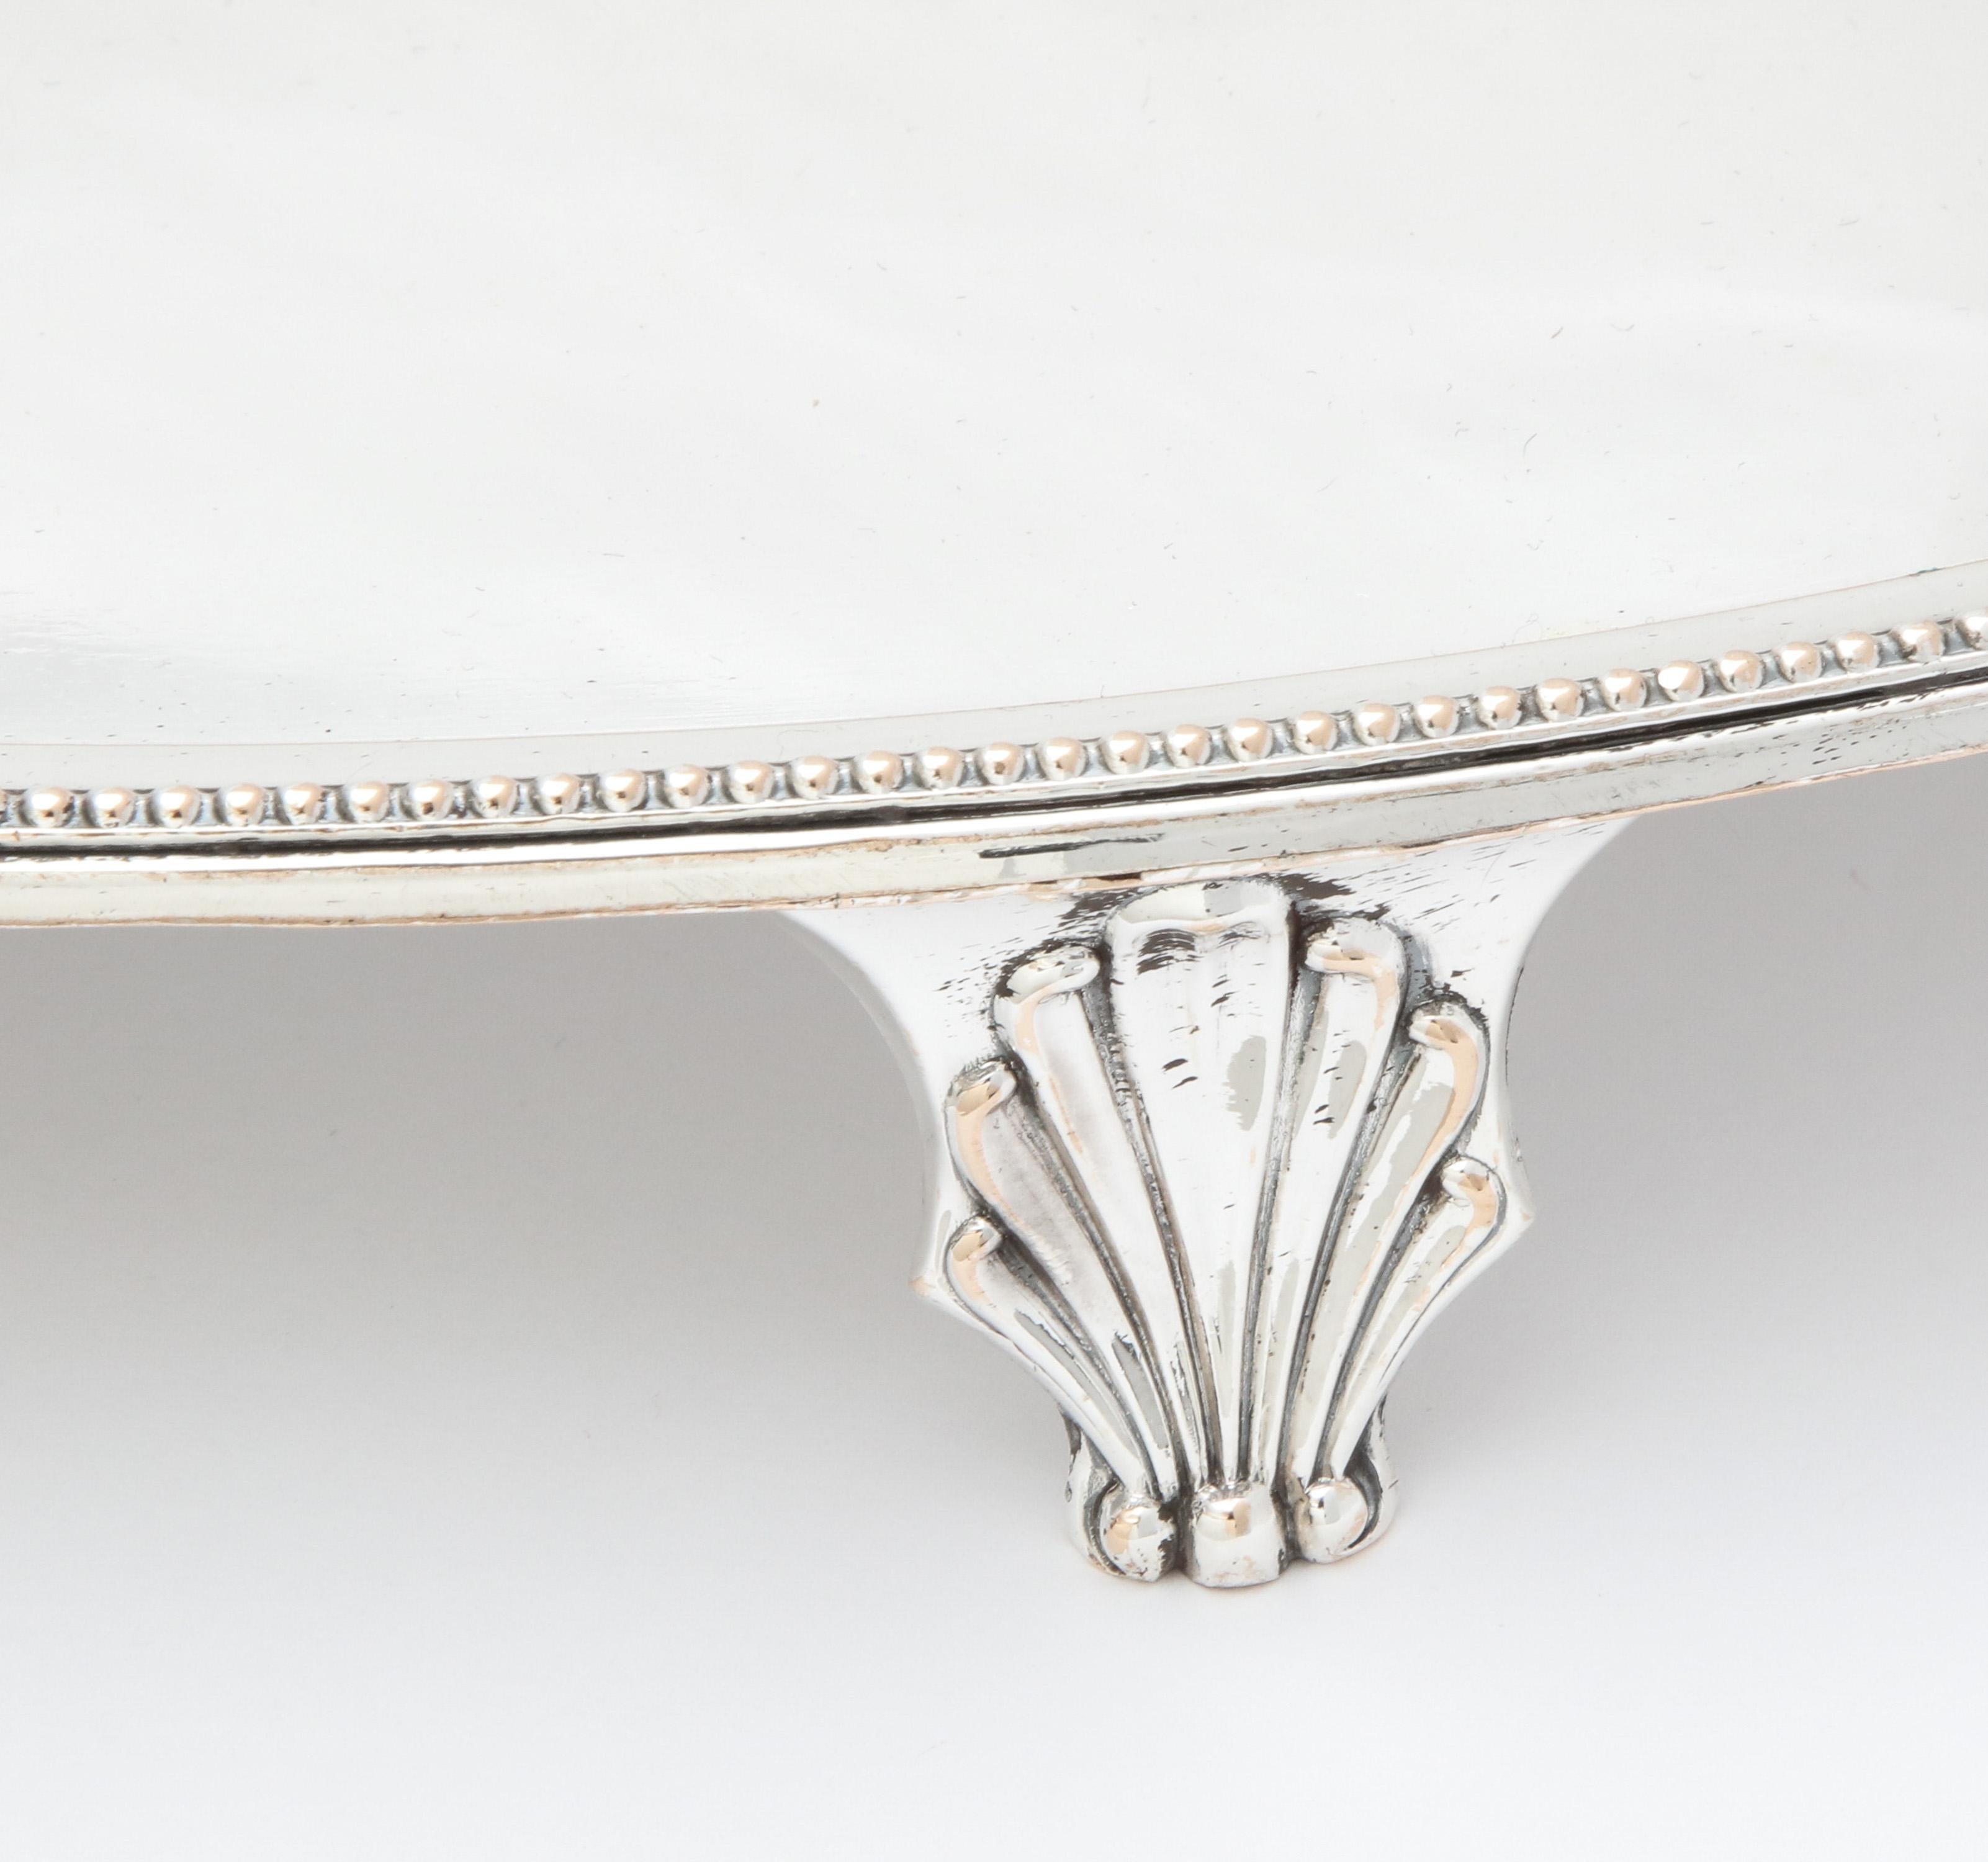 Large Georgian 'George III' Sheffield Plated Footed Tray with Coat of Arms In Good Condition For Sale In New York, NY